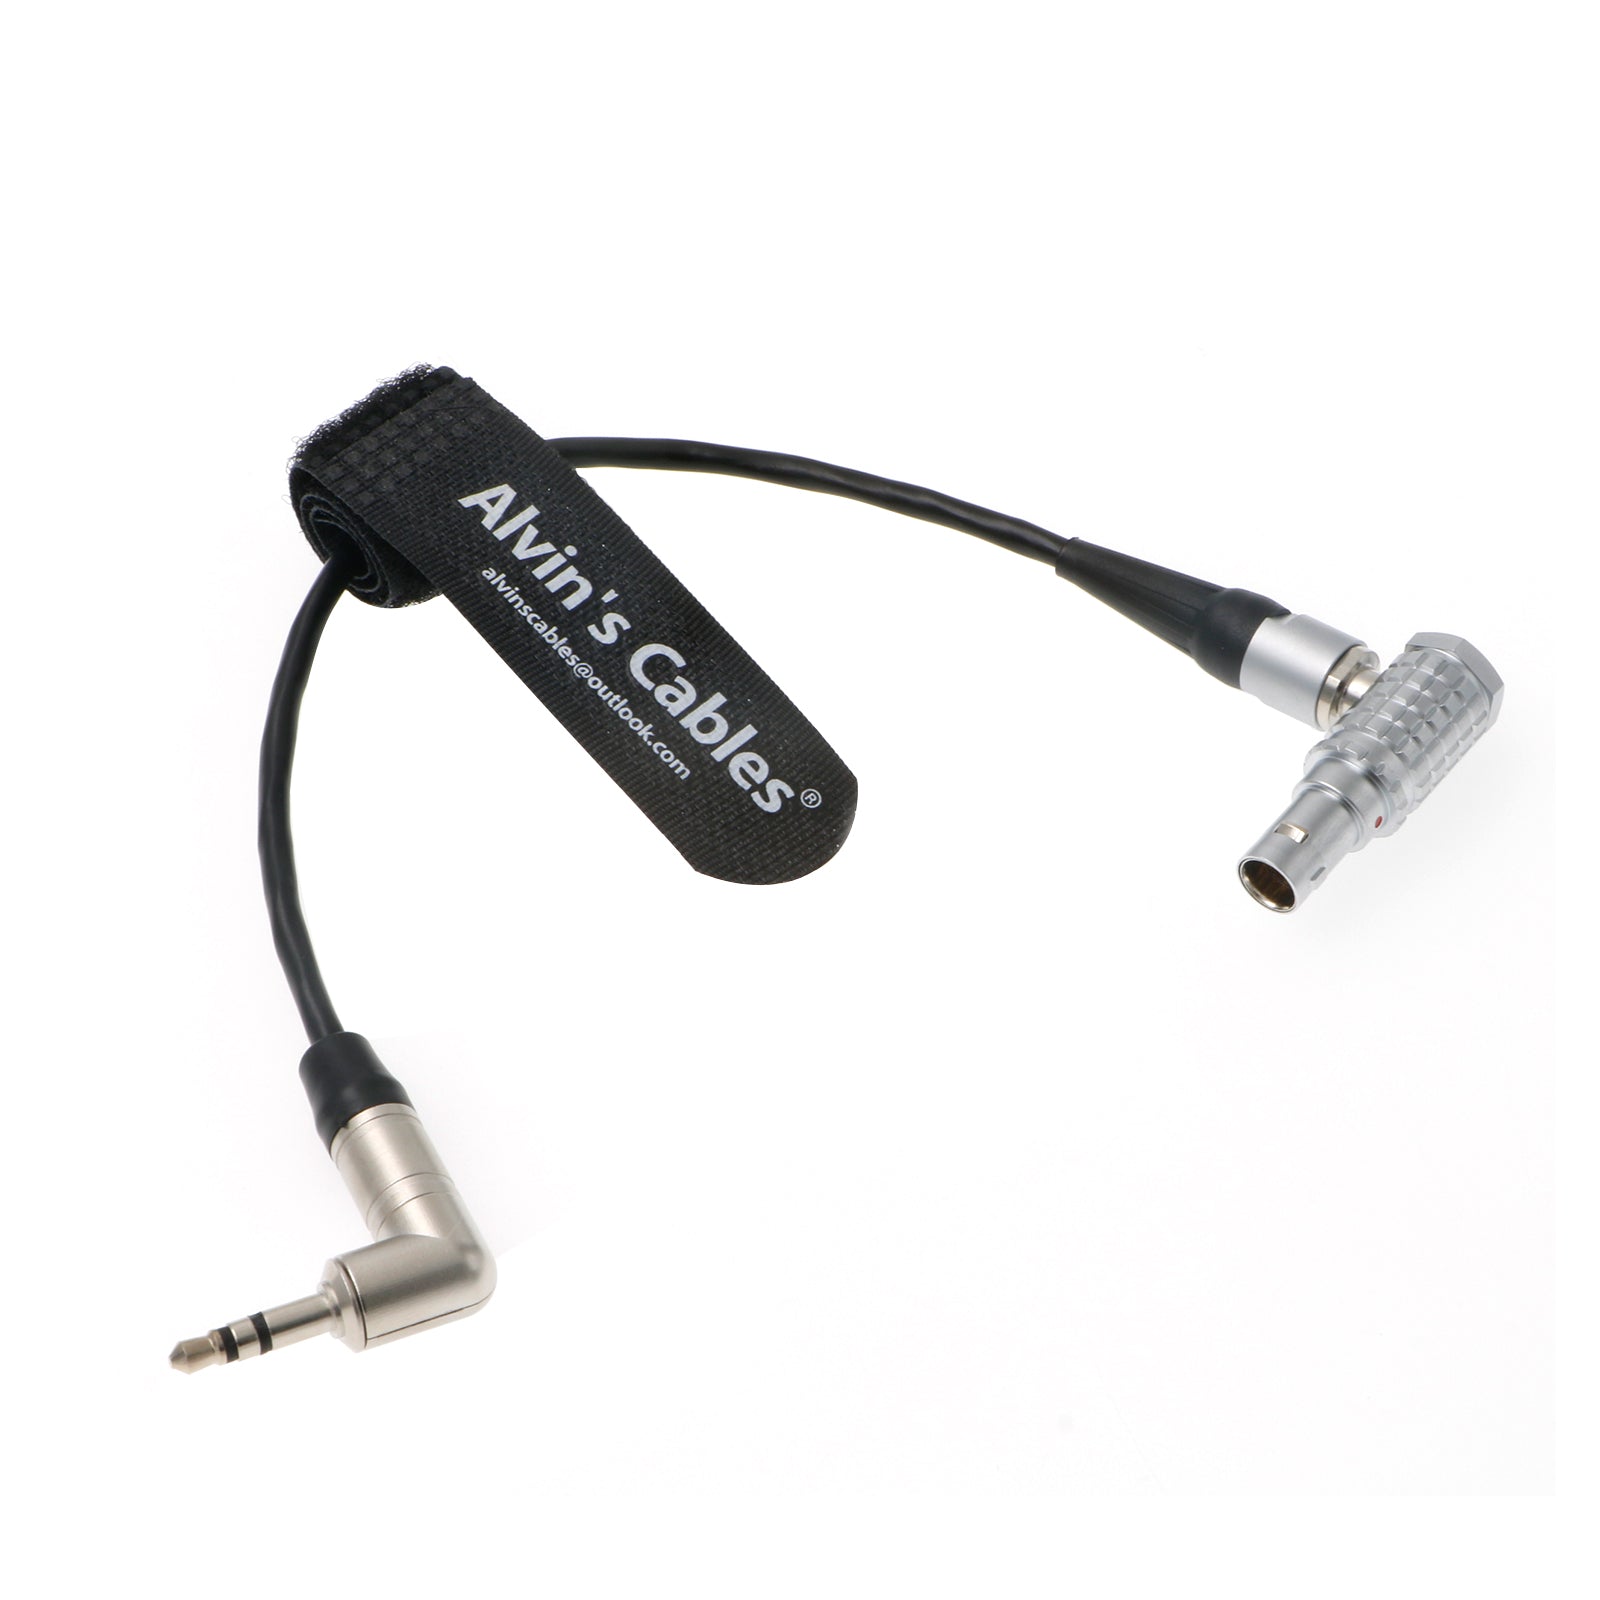 Timecode-Out-Cable for Sound-Devices|Tentacle-Sync Time-Code from 5-Pin-Male Right-Angle to 1/8